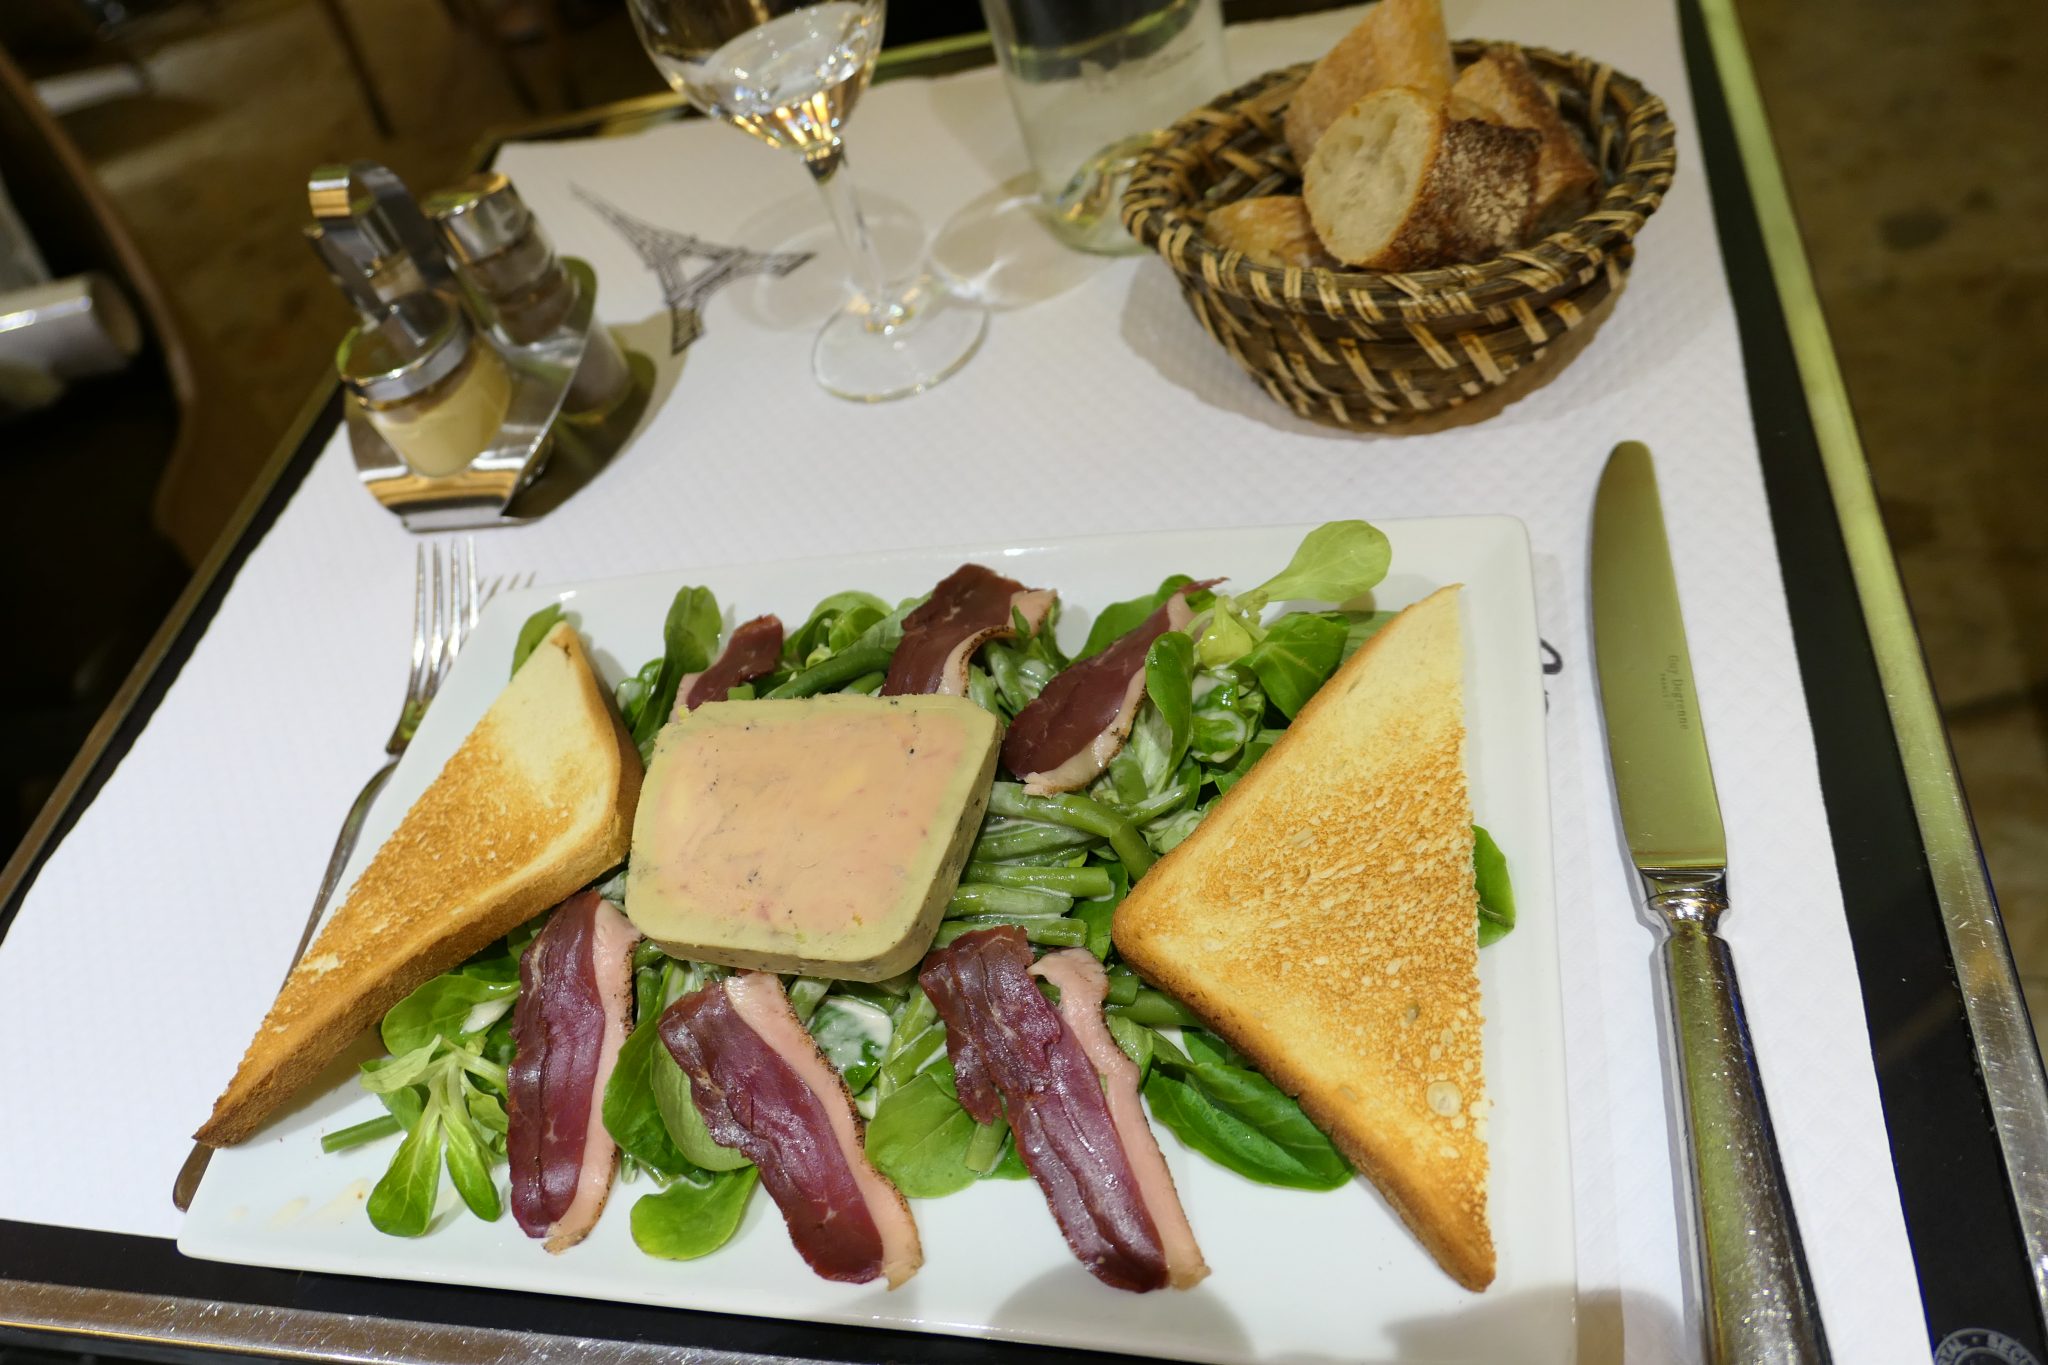 Duck salad with pate